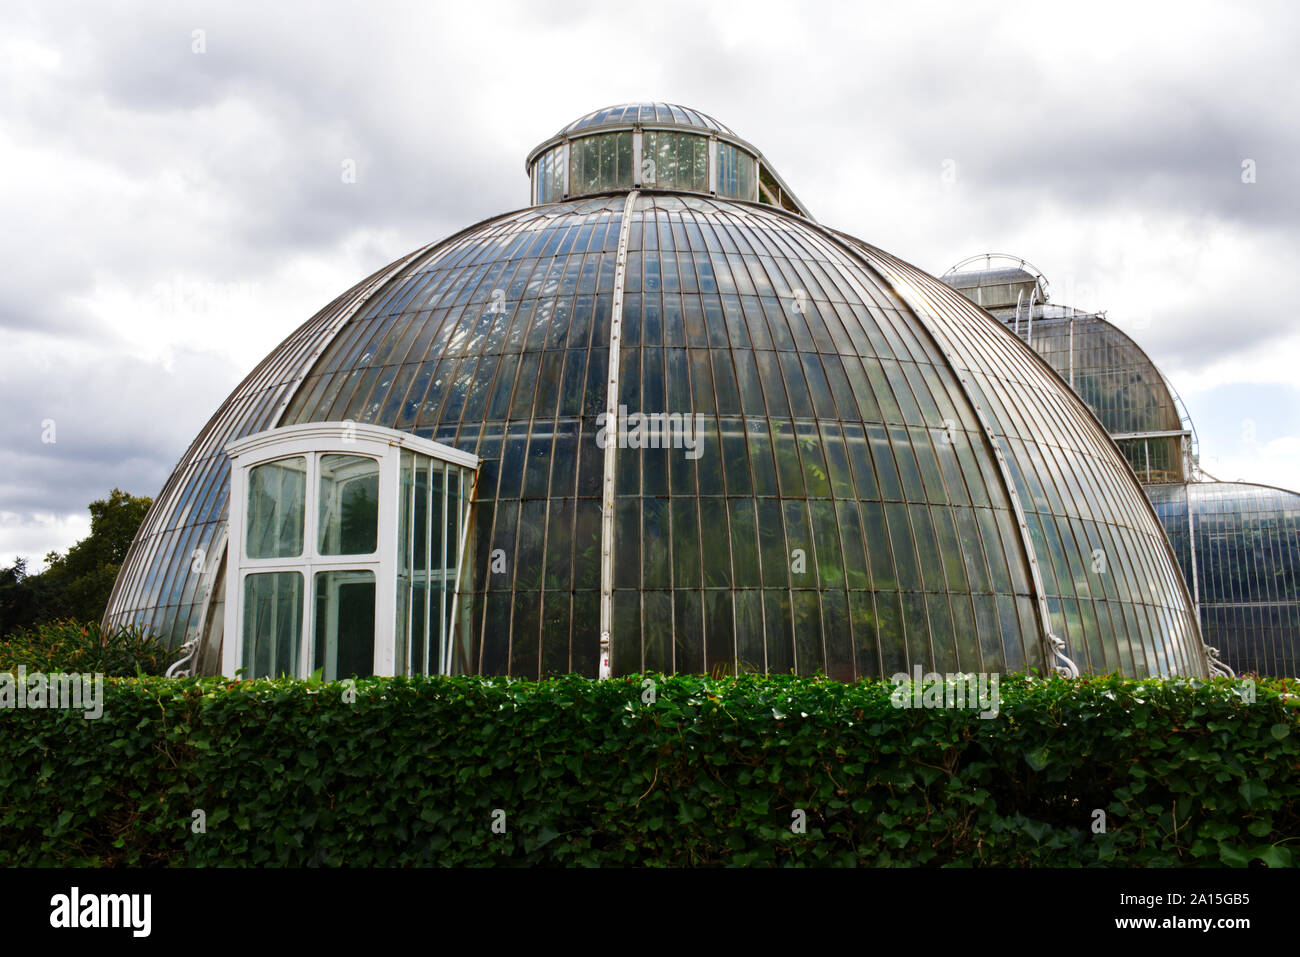 Exterior of the Palm House, a Victorian glasshouse at Kew Gardens, Richmond, London, England, UK Stock Photo